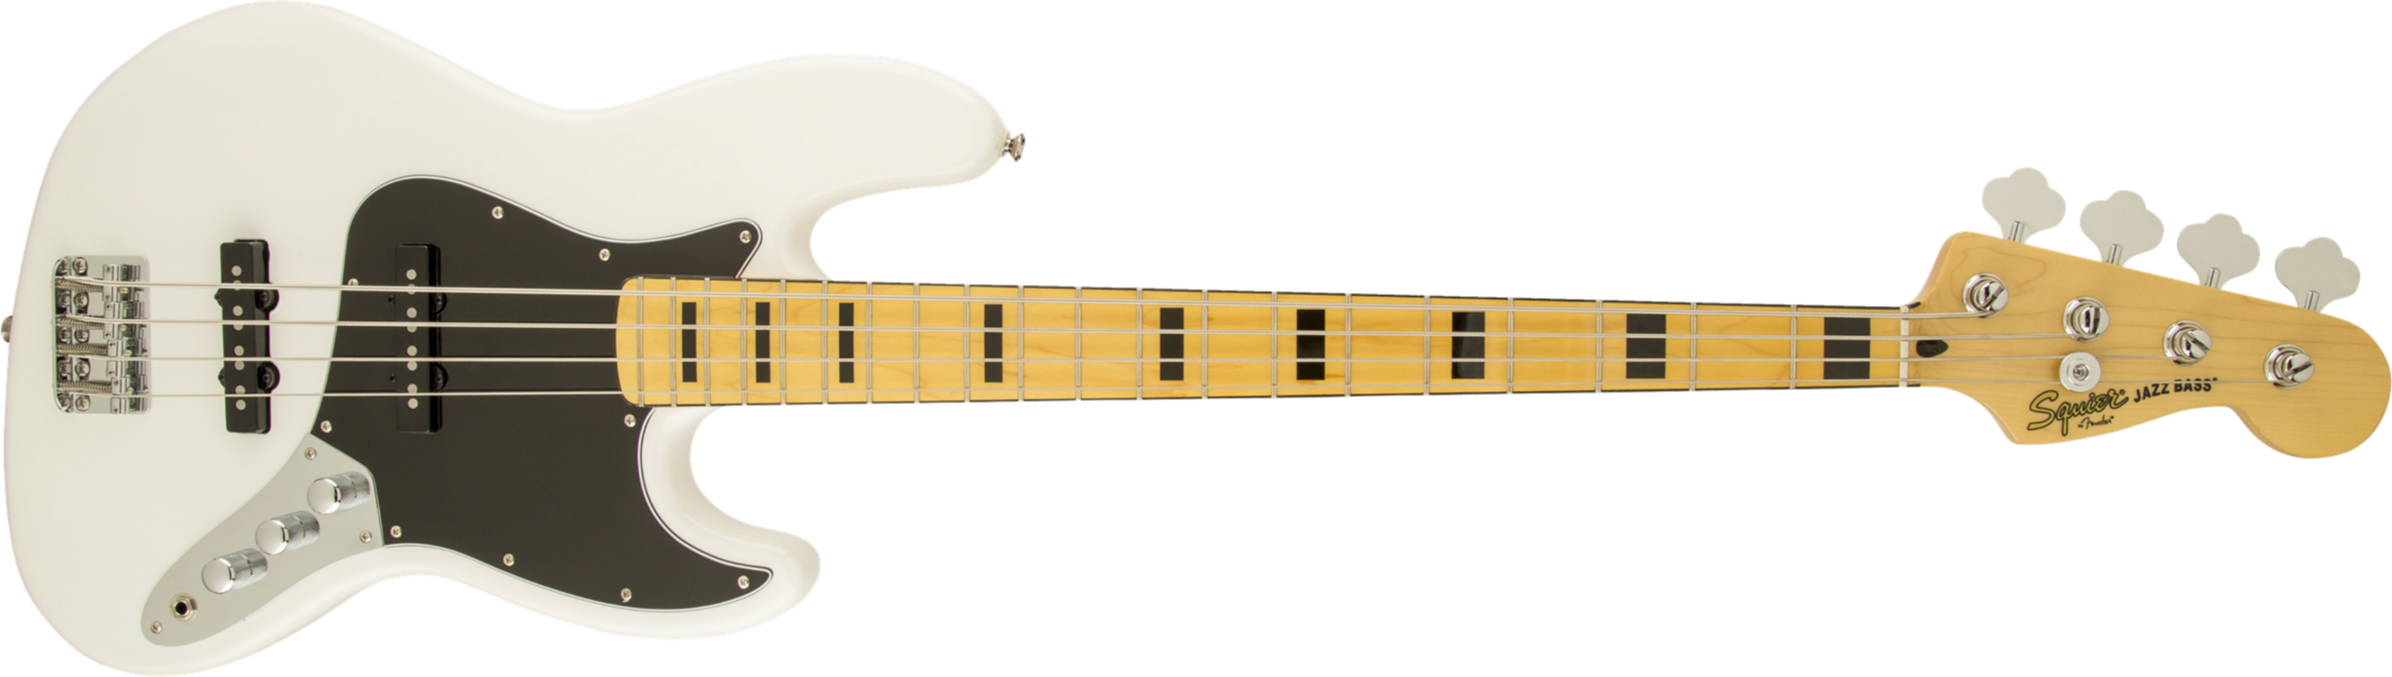 Squier Jazz Bass Vintage Modified 70 2013 Mn Olympic White - Solid body elektrische bas - Main picture